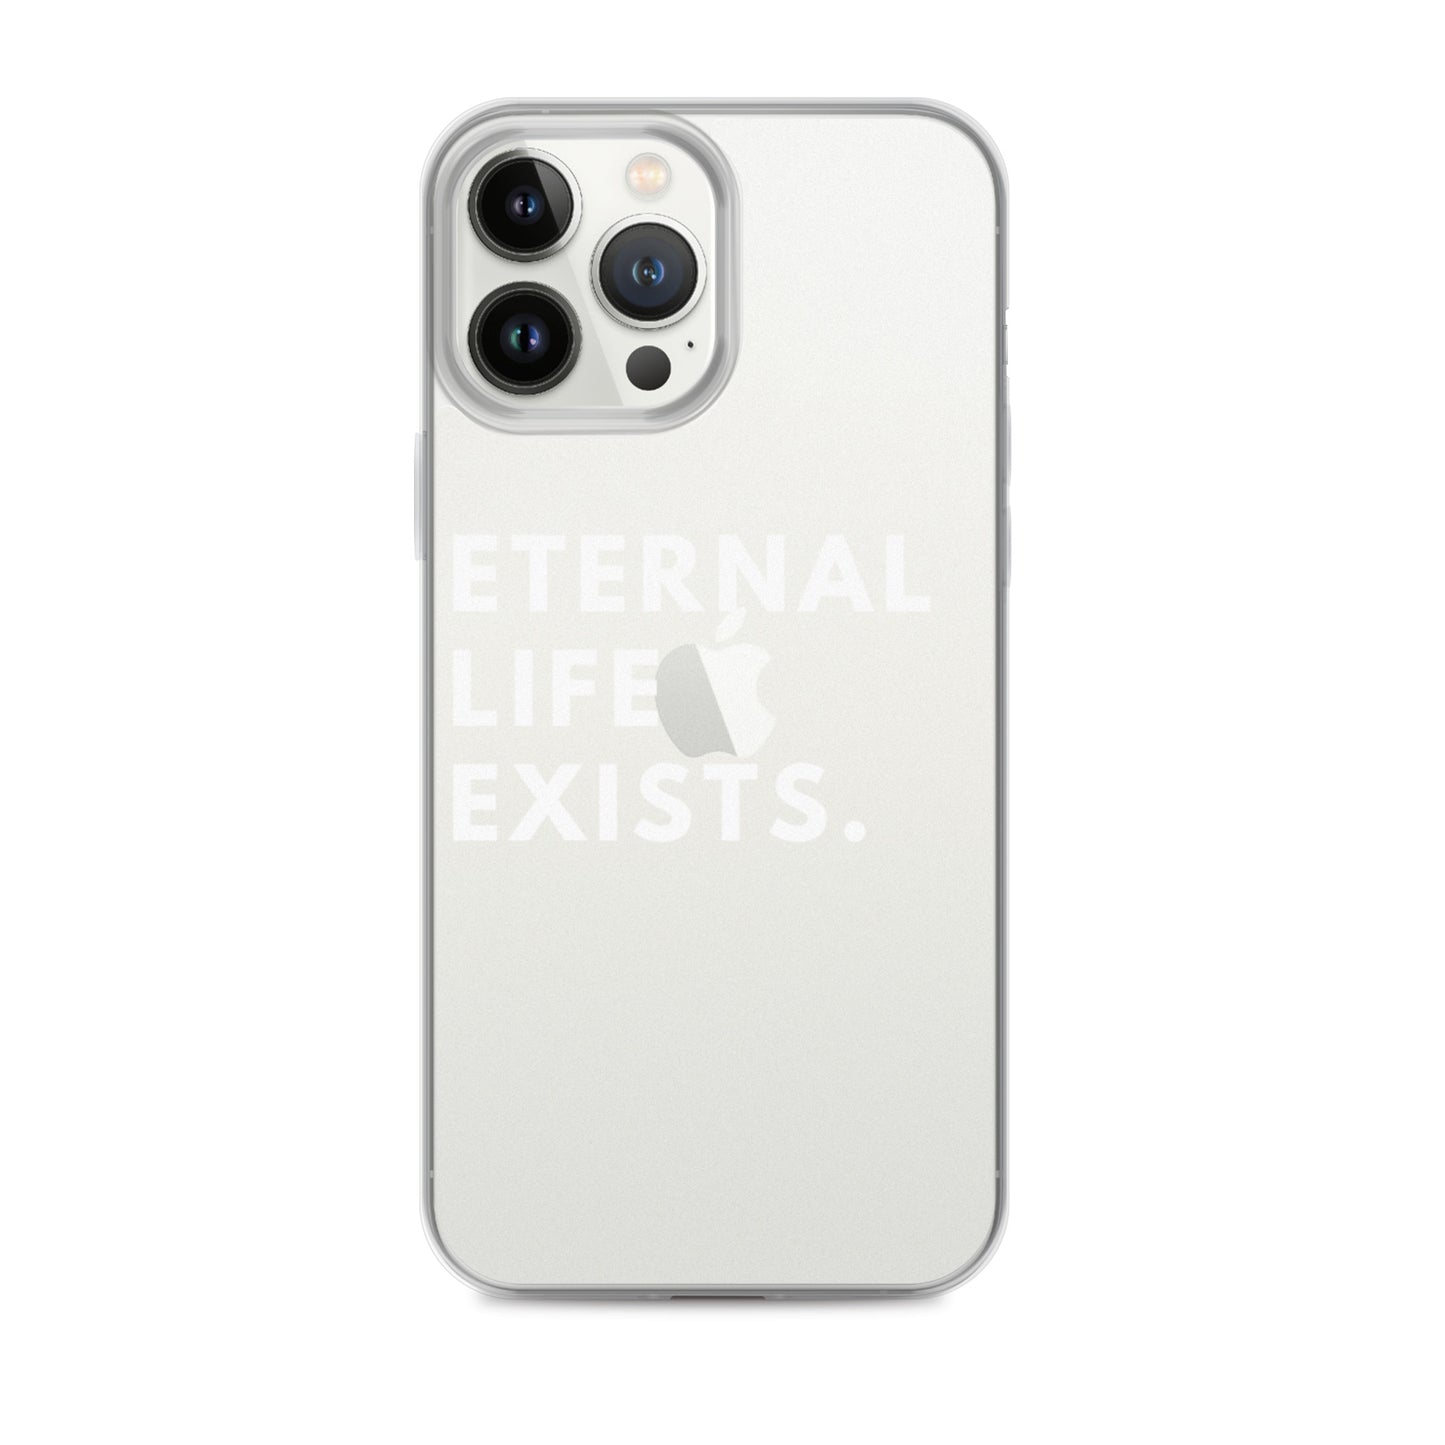 Eternal Life Exists White Letter iPhone Case